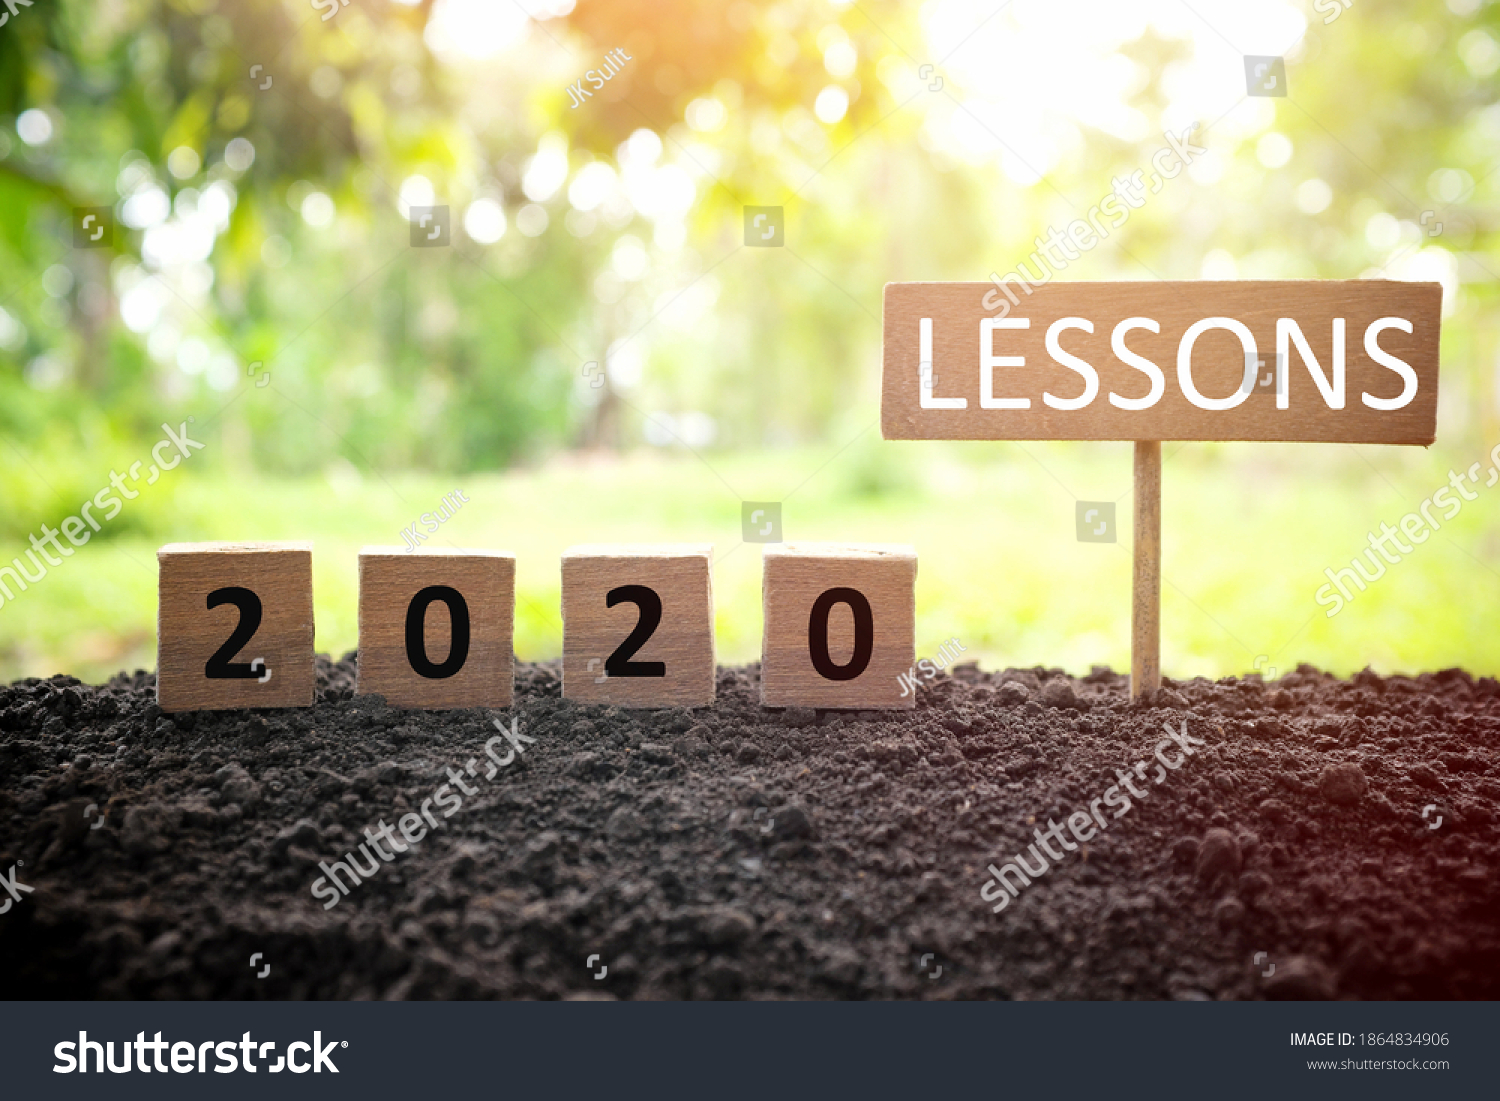 Life lessons and learnings from the year 2020 concept. A tree branch with a single remaining last leaf hanging beside a 2020 learning in wooden blocks at sunset.  #1864834906